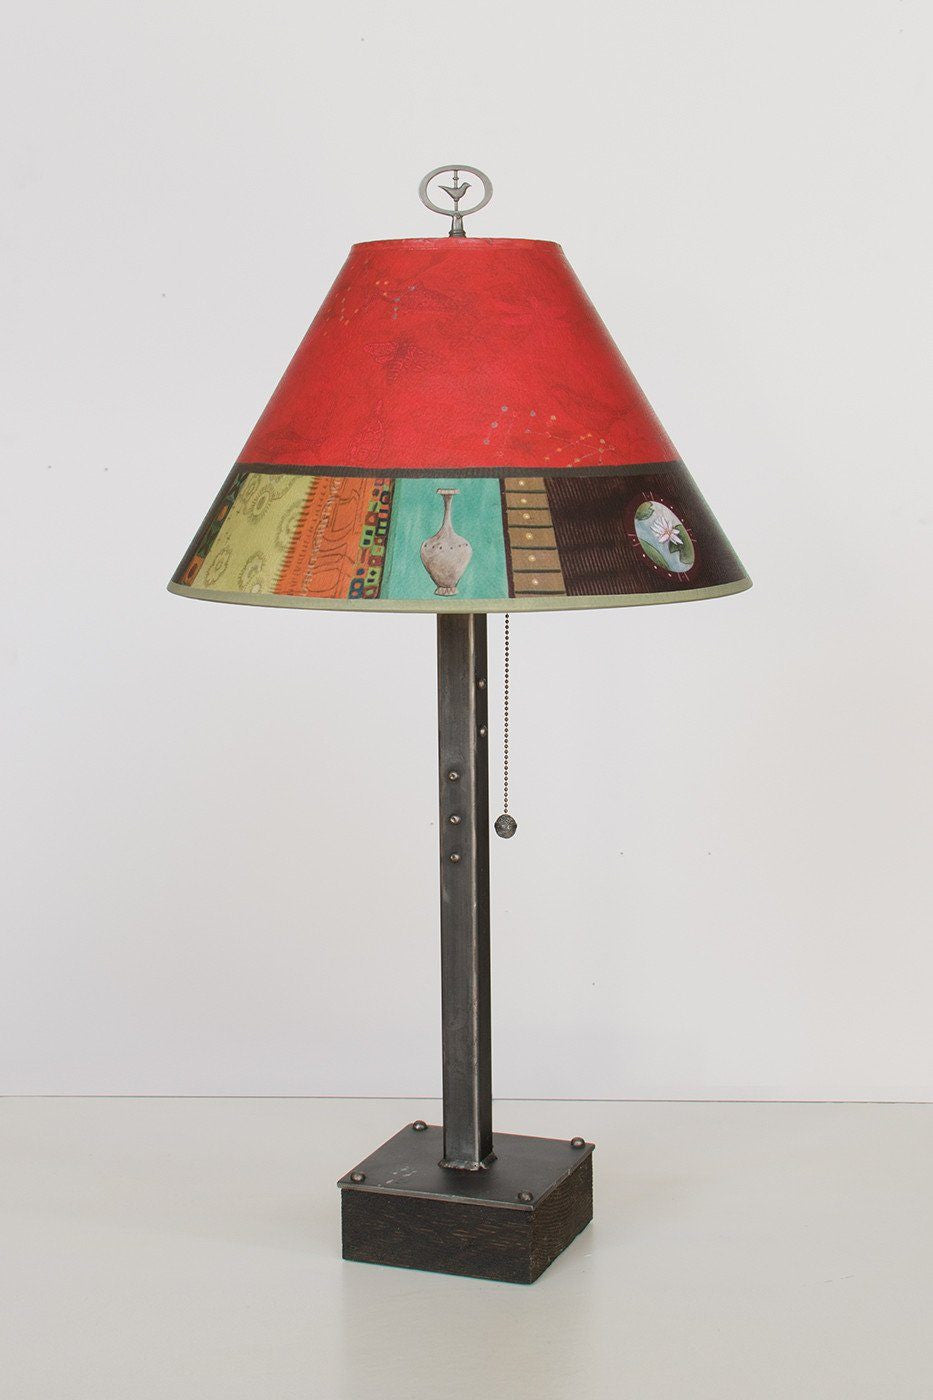 Steel Table Lamp on Wood with Medium Conical Shade in Red Match